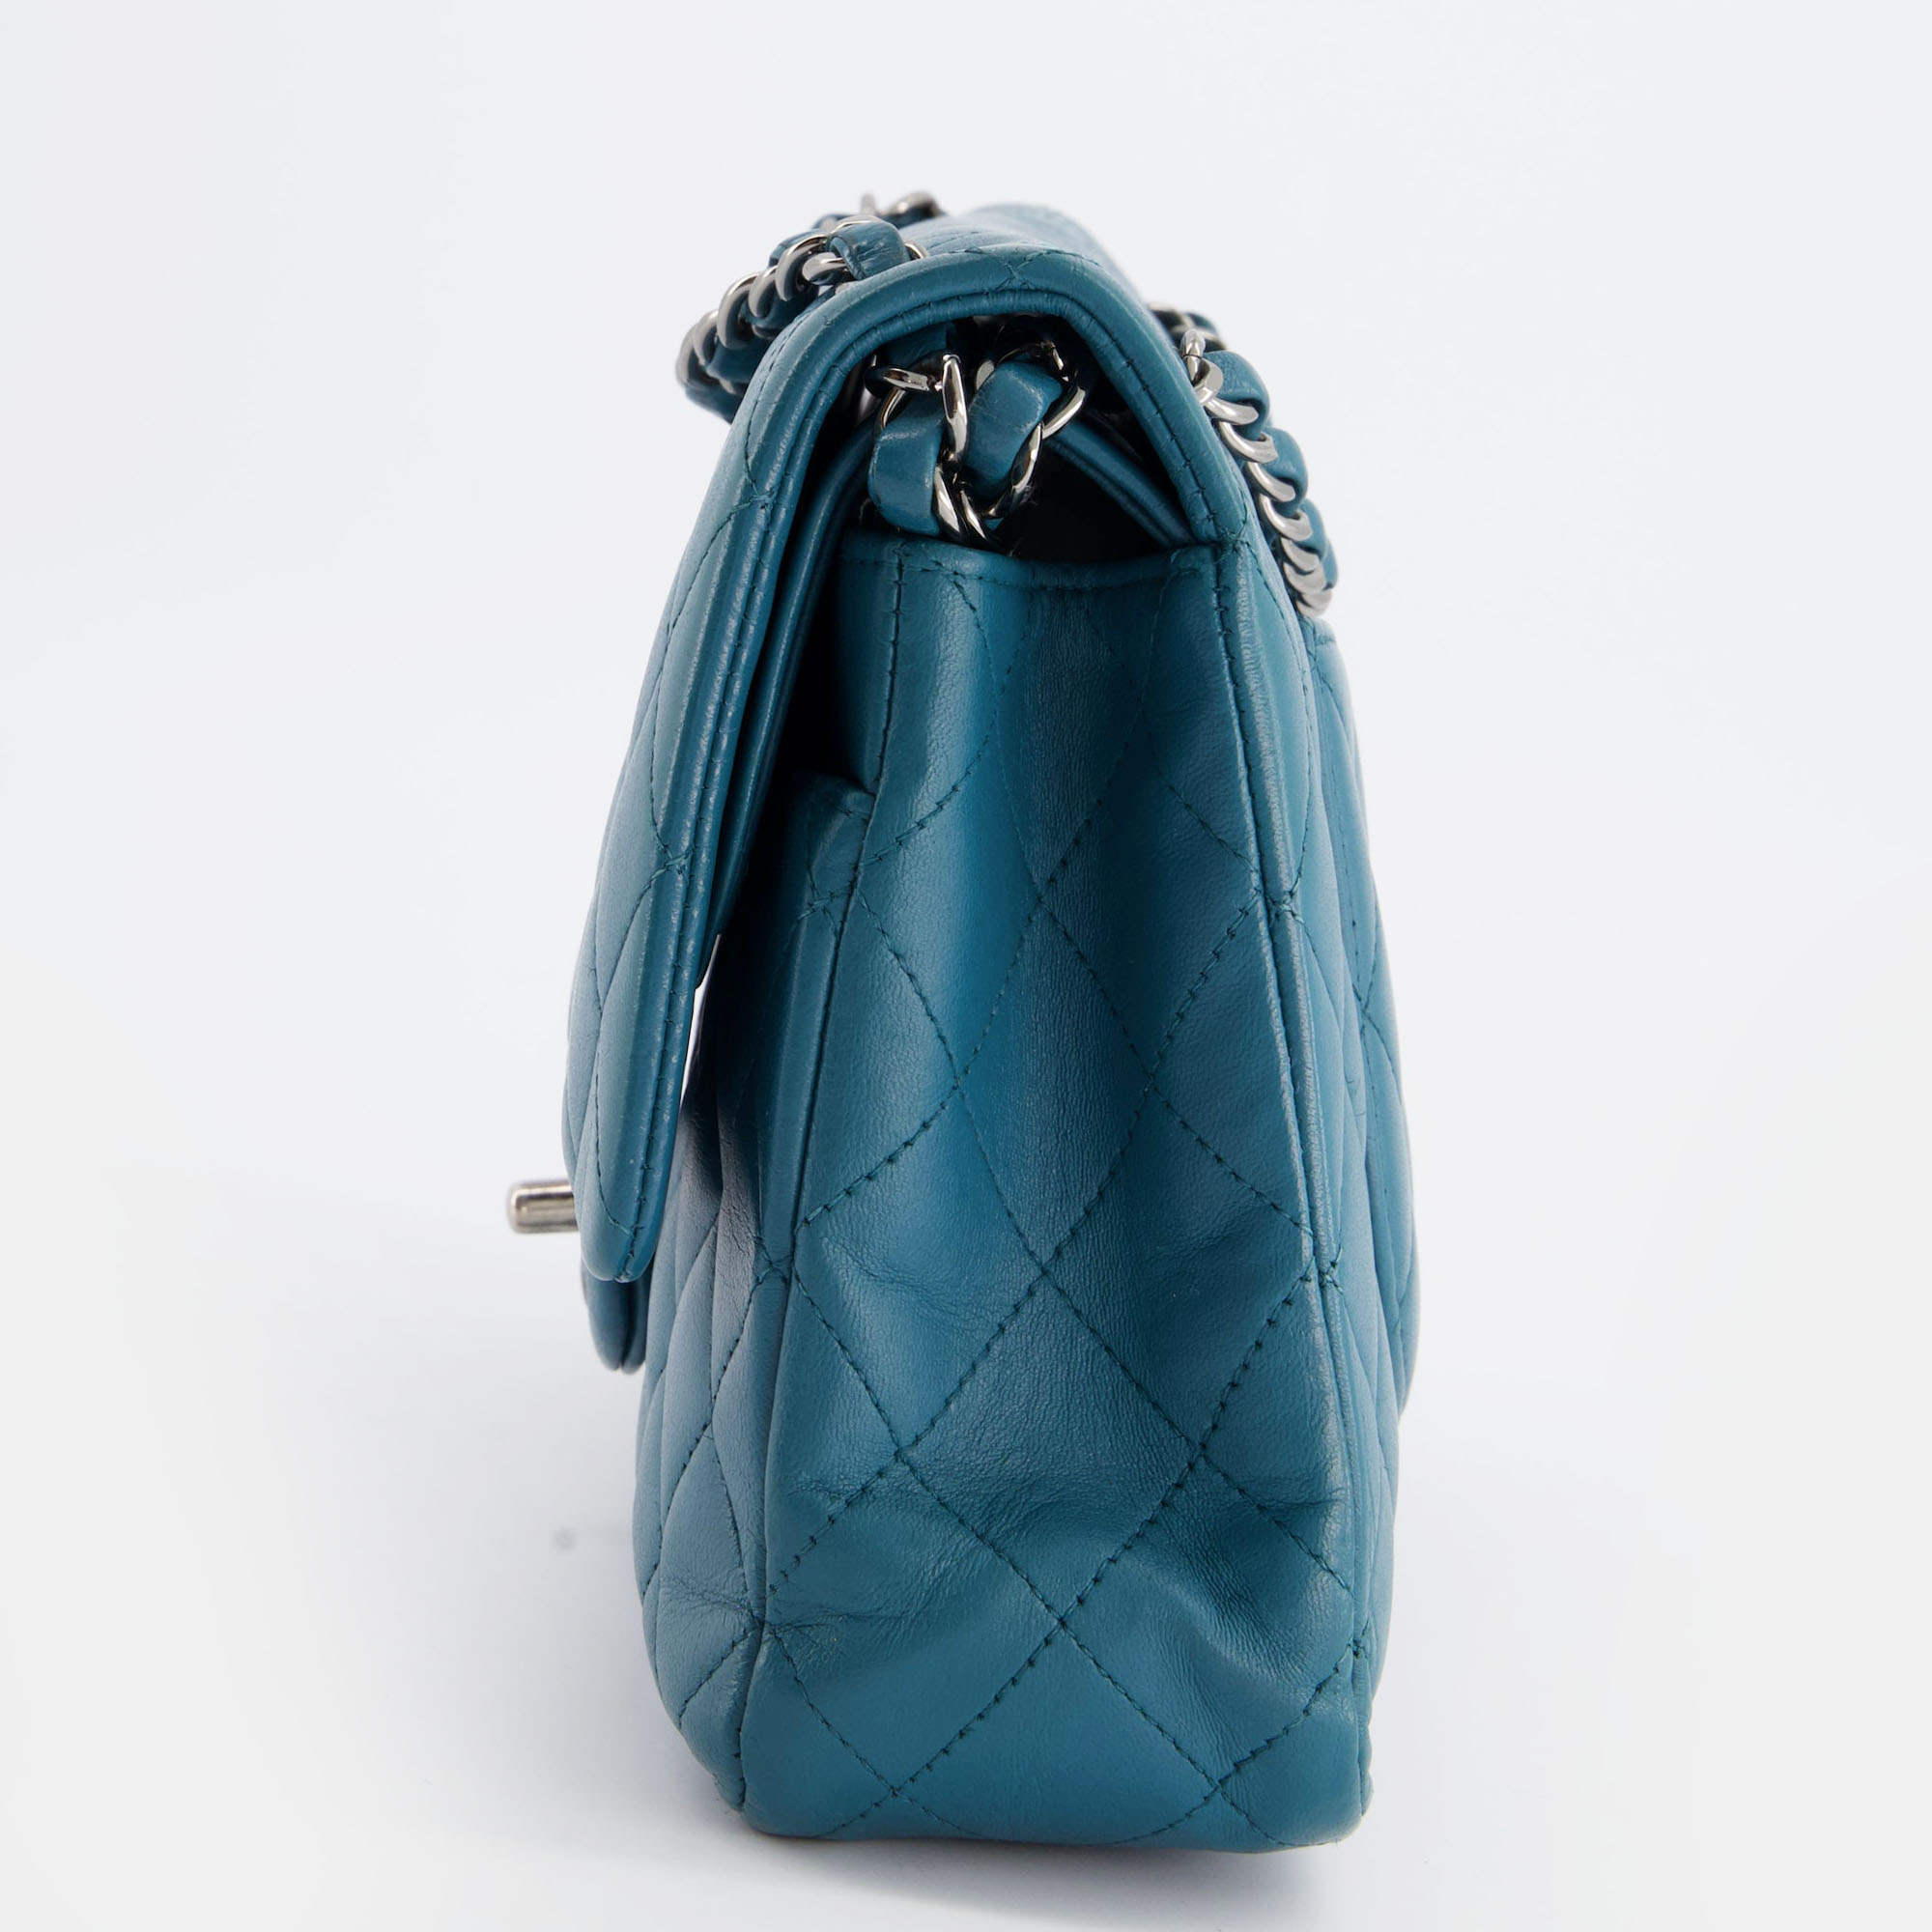 Chanel Medium Teal Classic Double Flap Bag In Lambskin With Ruthenium Hardware